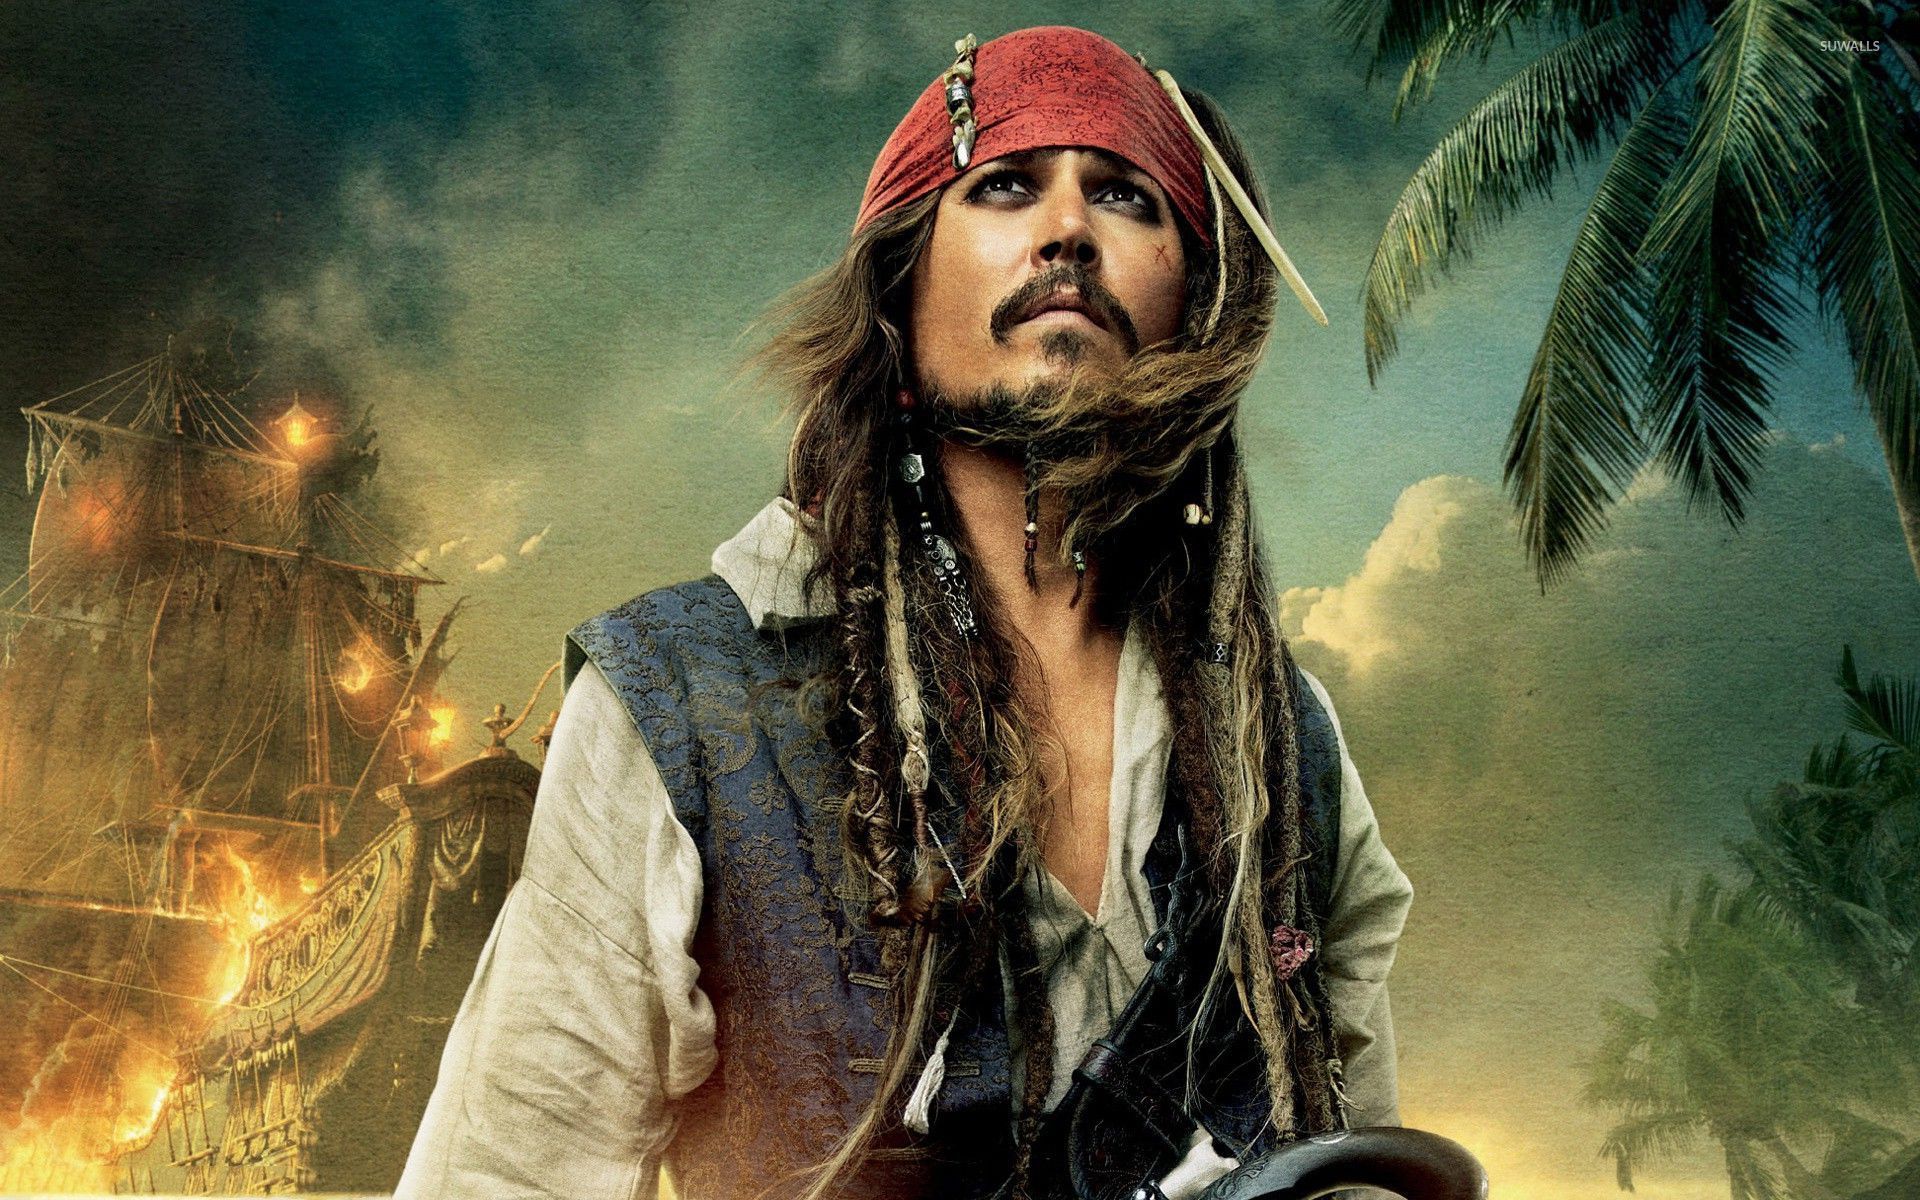 pirates of the caribbean 4 full movie free download in hindi hd iyify